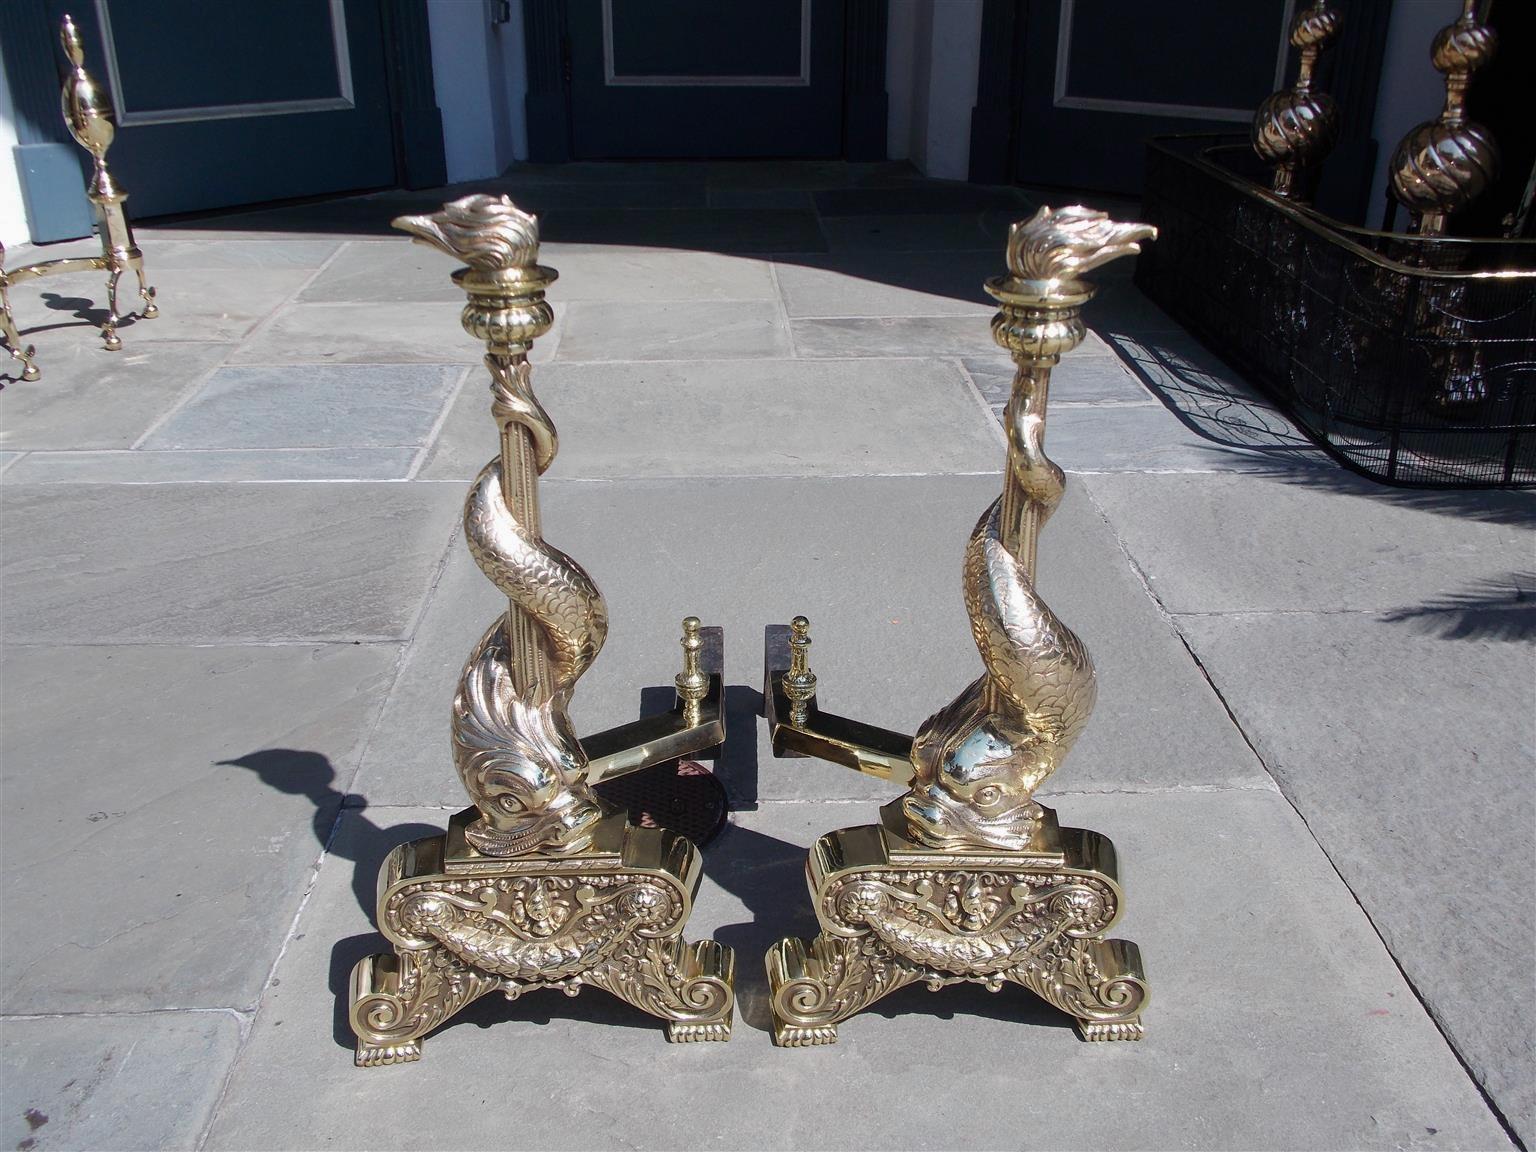 Pair of English brass intertwined dolphin andirons with flanking flame finials, matching urn finial log stops, original cast iron dog legs, and terminating on scrolled gadrooned legs with swag and acanthus motif. Early 19th century.